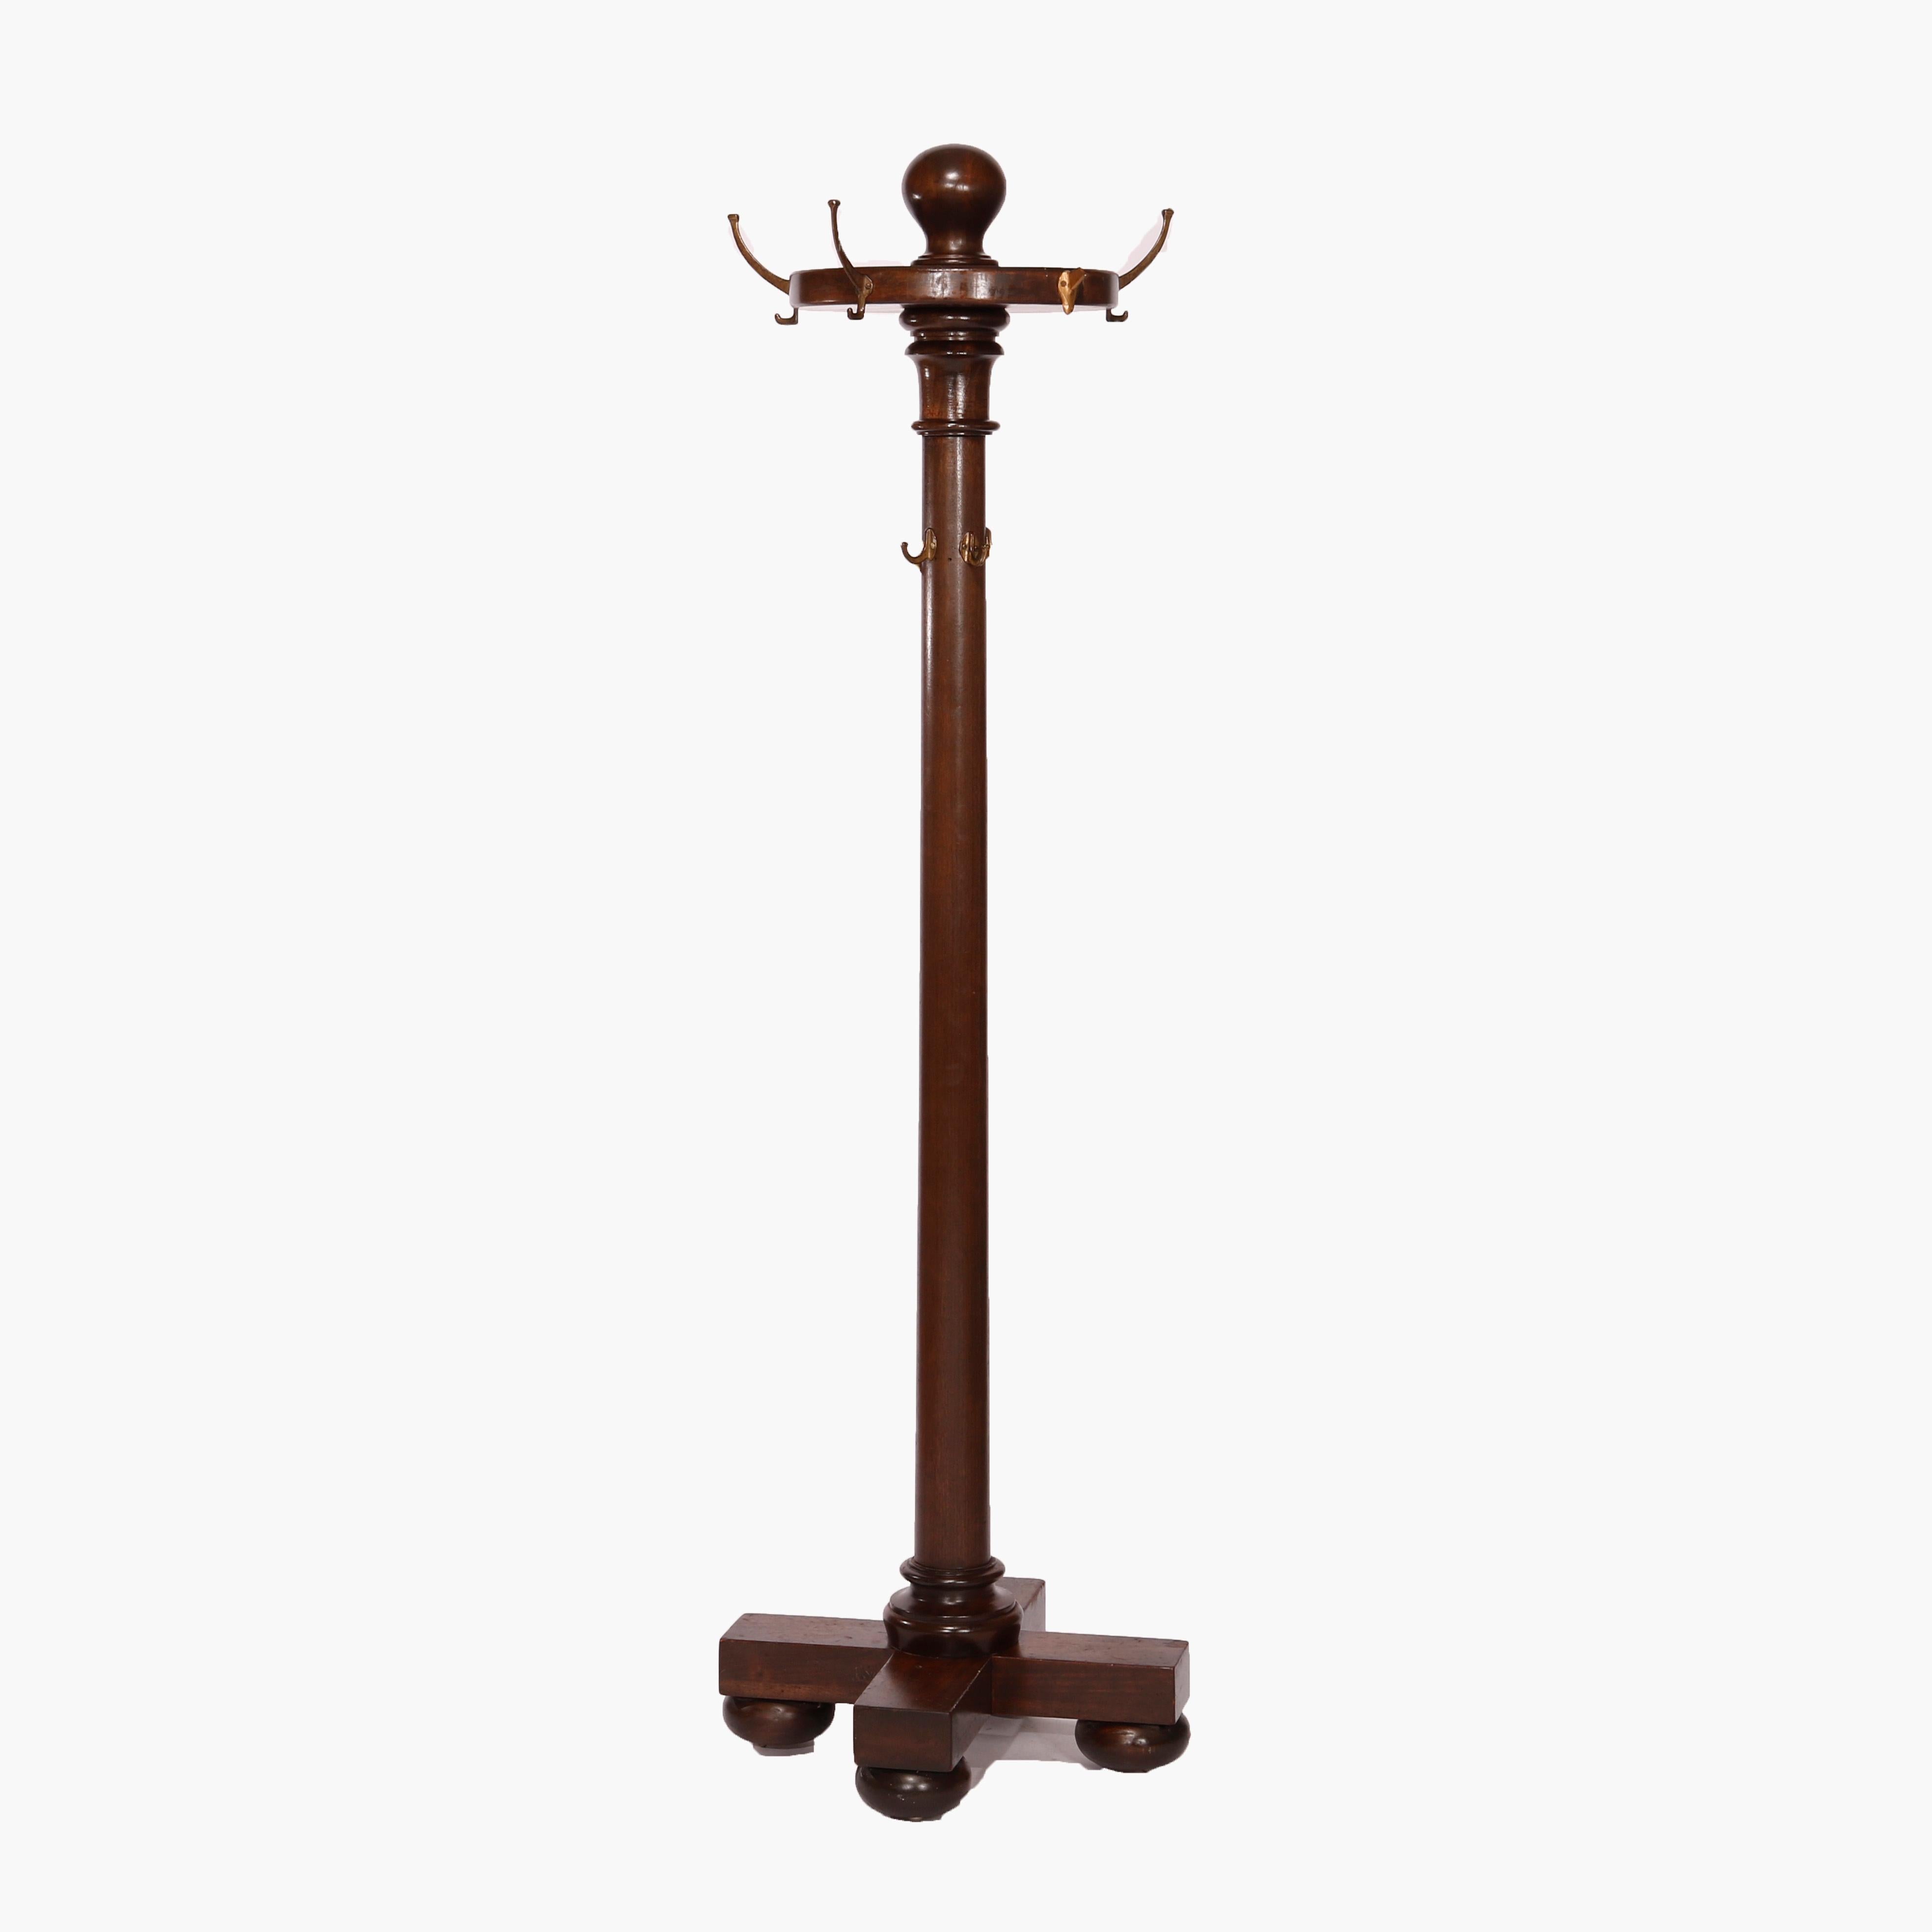 An antique Arts and Crafts hall hat rack offers mahogany construction with turned column seated on base with bun feet, c1910

Measures- 72''H x 21.25''W x 21.25''D.

Catalogue Note: Ask about DISCOUNTED DELIVERY RATES available to most regions